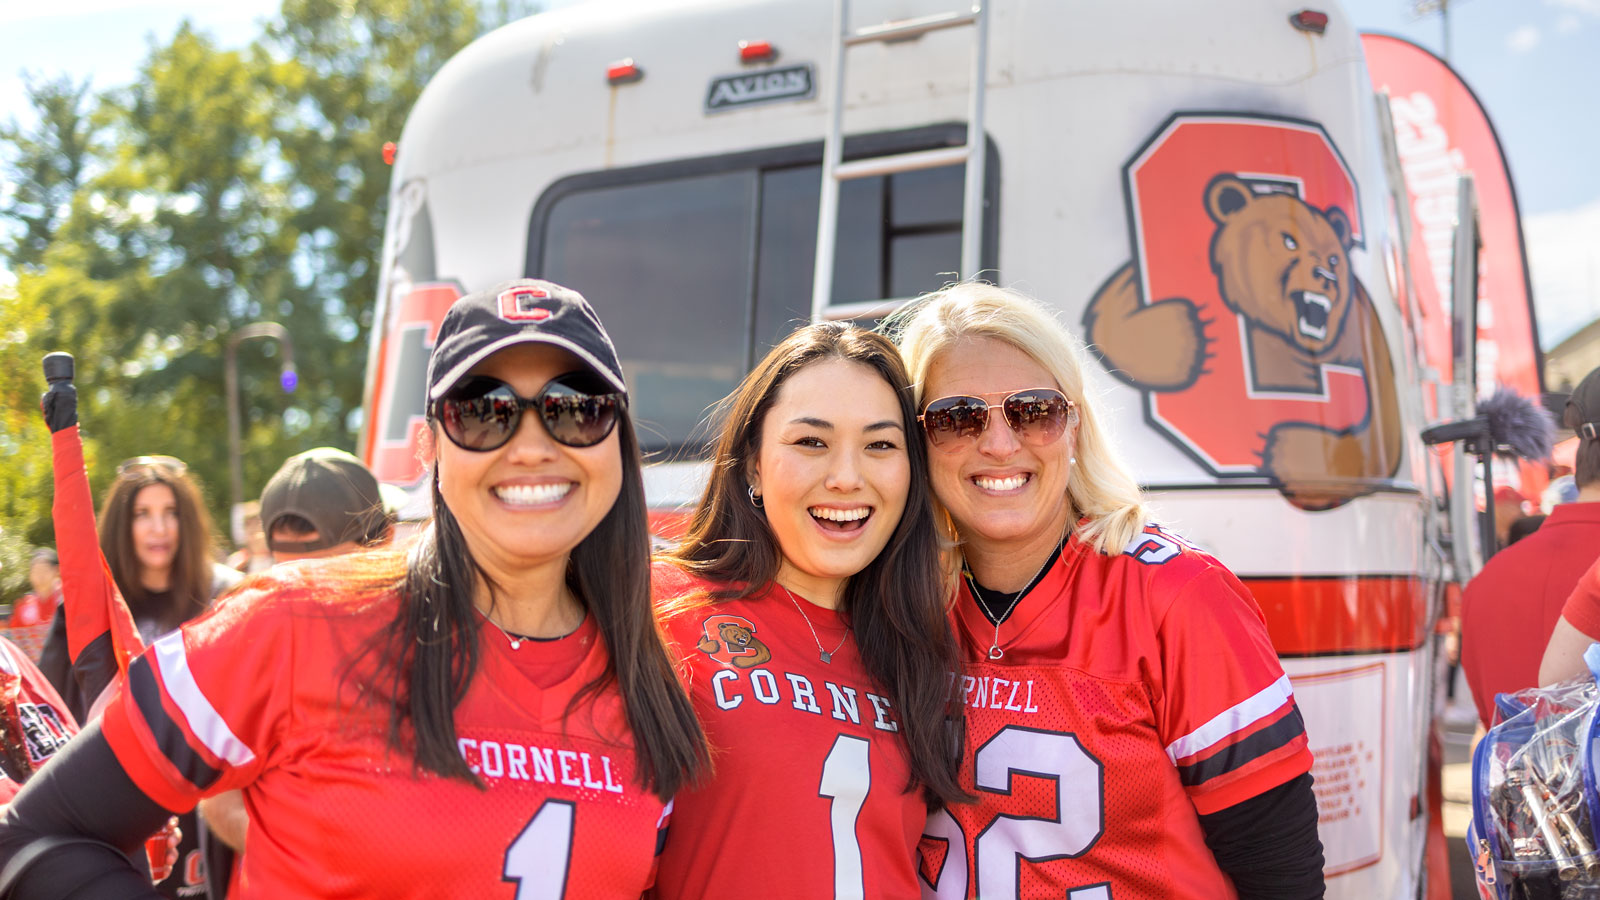 Cornellians enjoy the Homecoming Big Red Fan Festival in the Crescent Lot